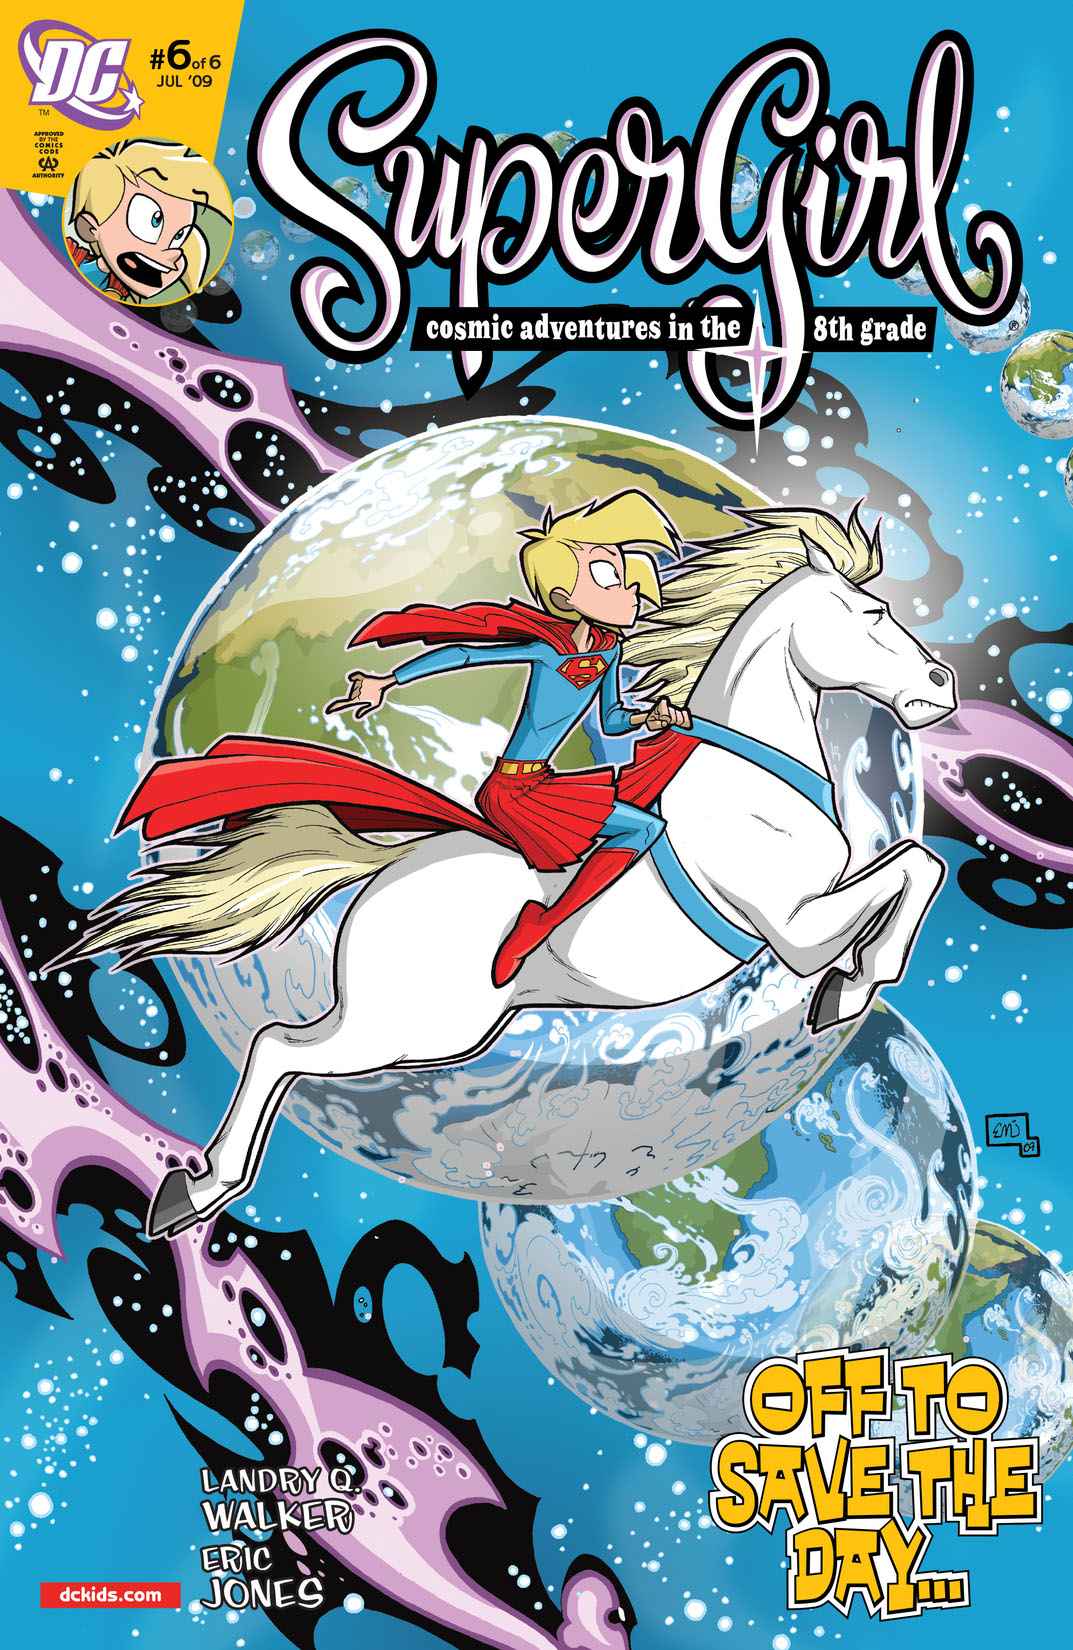 Supergirl: Cosmic Adventures in the 8th Grade #6 preview images